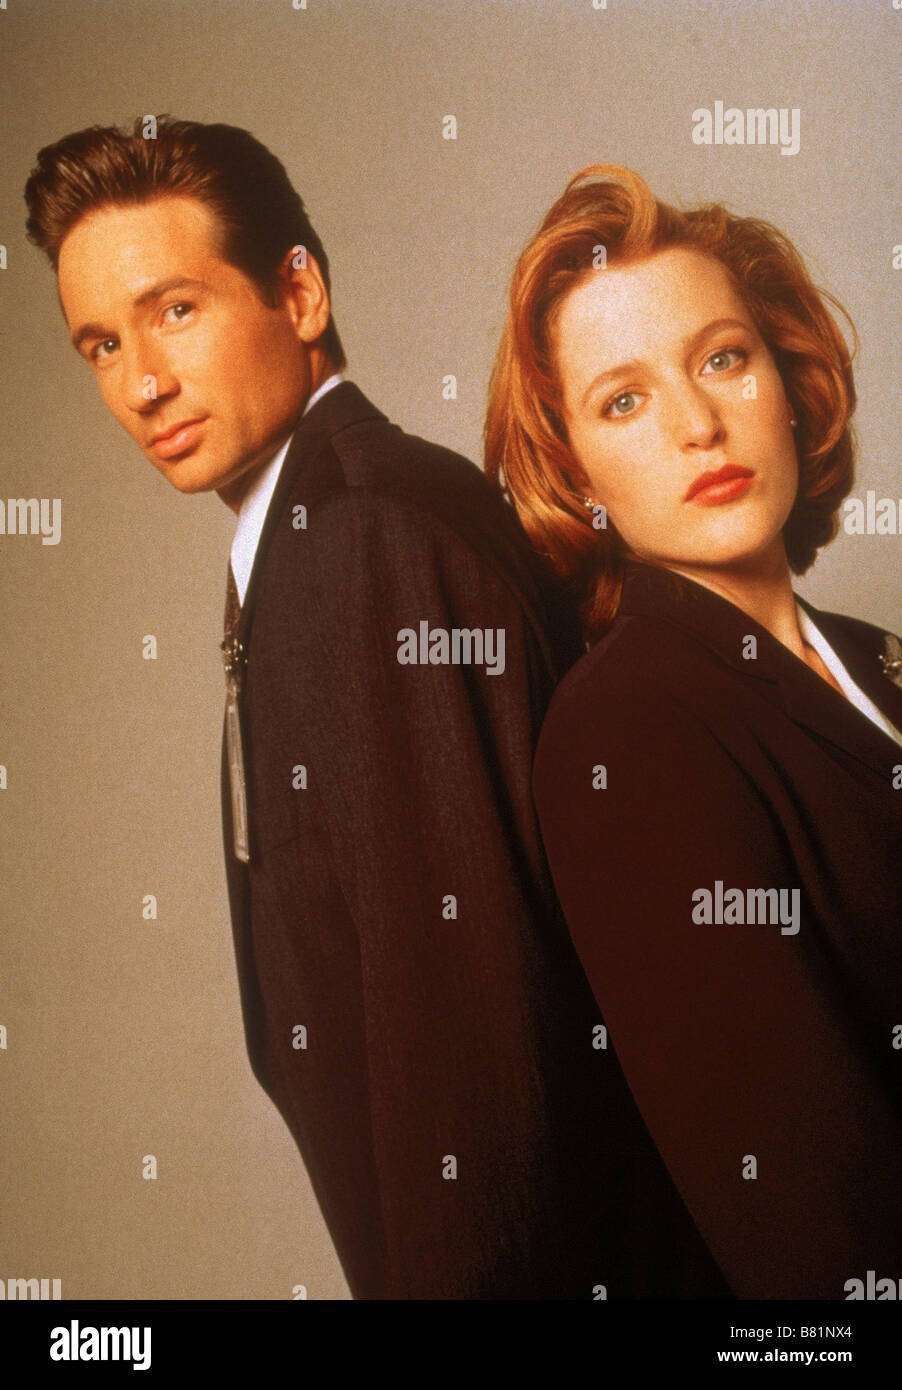 The X Files  TV Series1993 - 2002 USA 1995 Season 3 Created by Chris Carter David Duchovny , Gillian Anderson Stock Photo